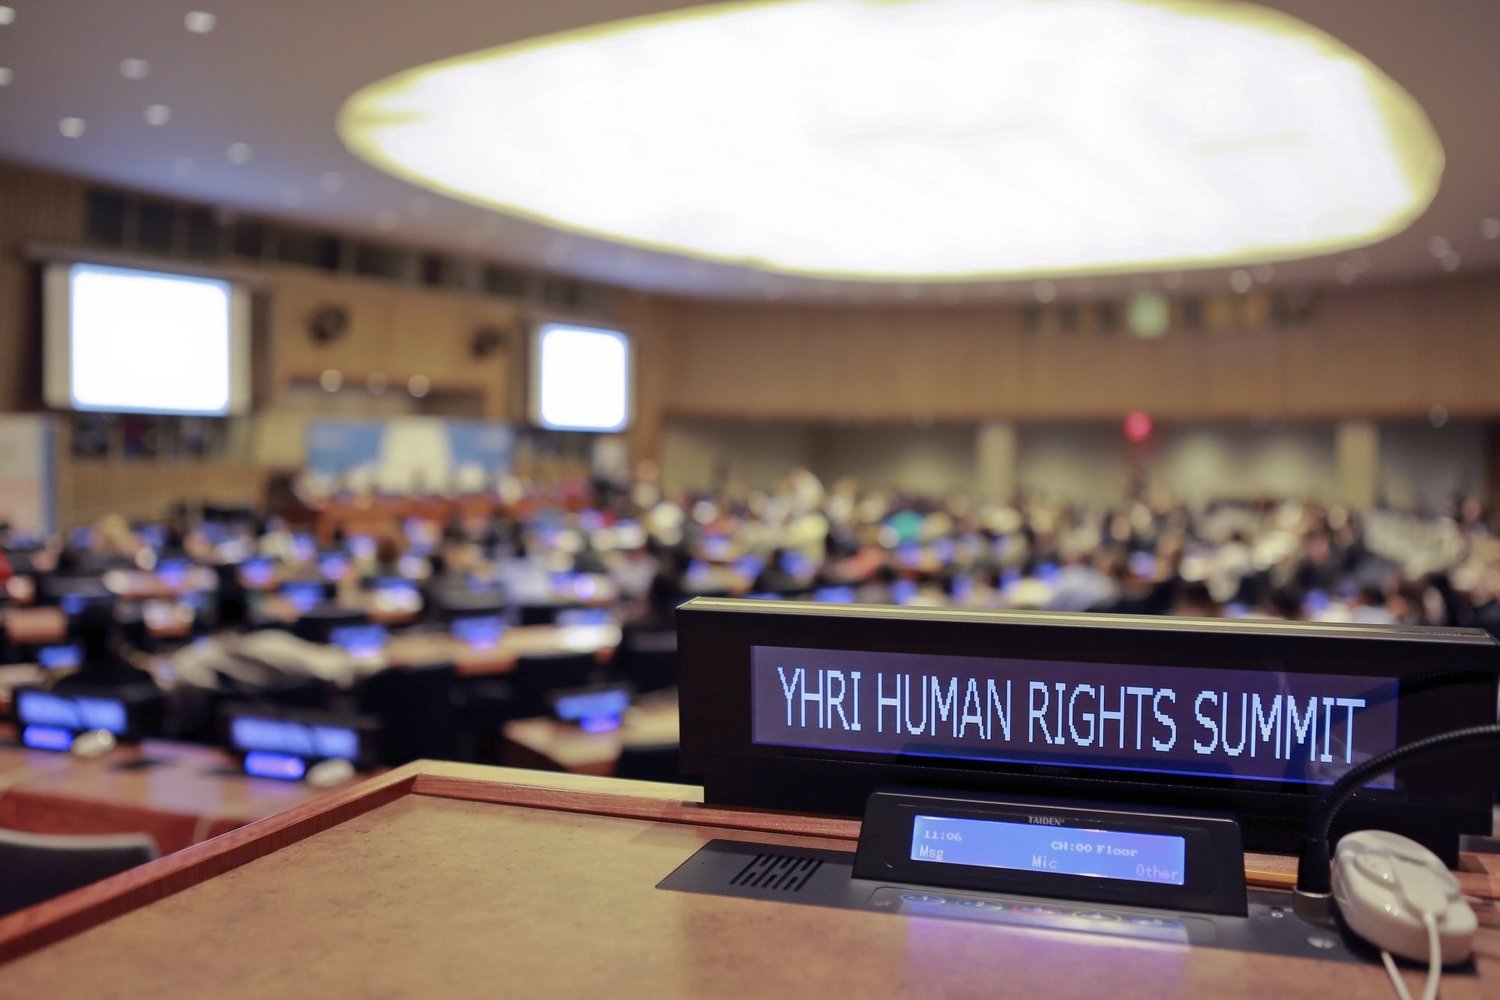 The Human Rights Summit was held at the United Nations in New York in Conference Room 4.